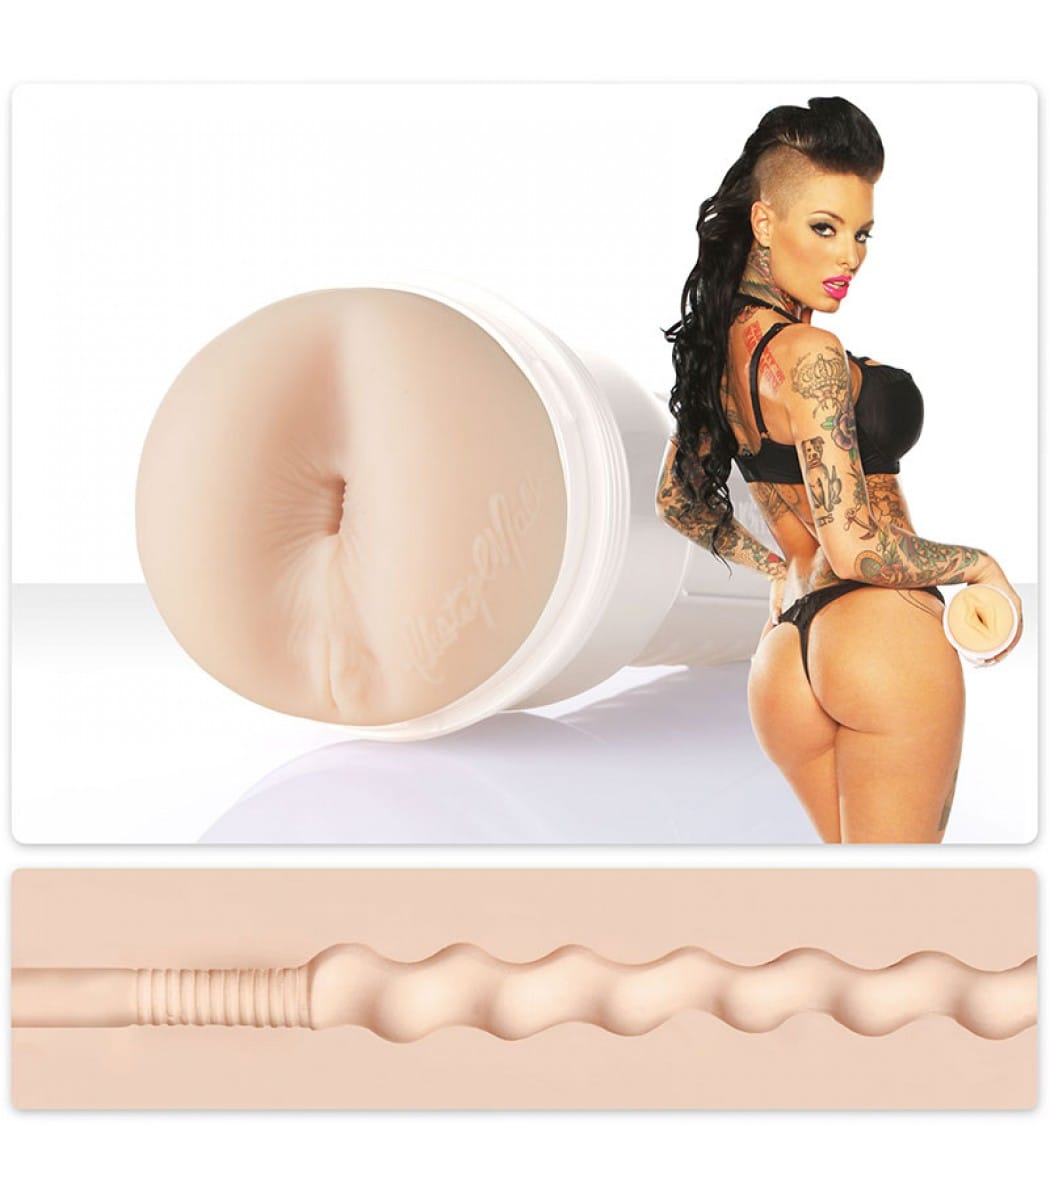 Wwwxnxxindianvideo - American Porn Stars Christy Mack | Sex Pictures Pass